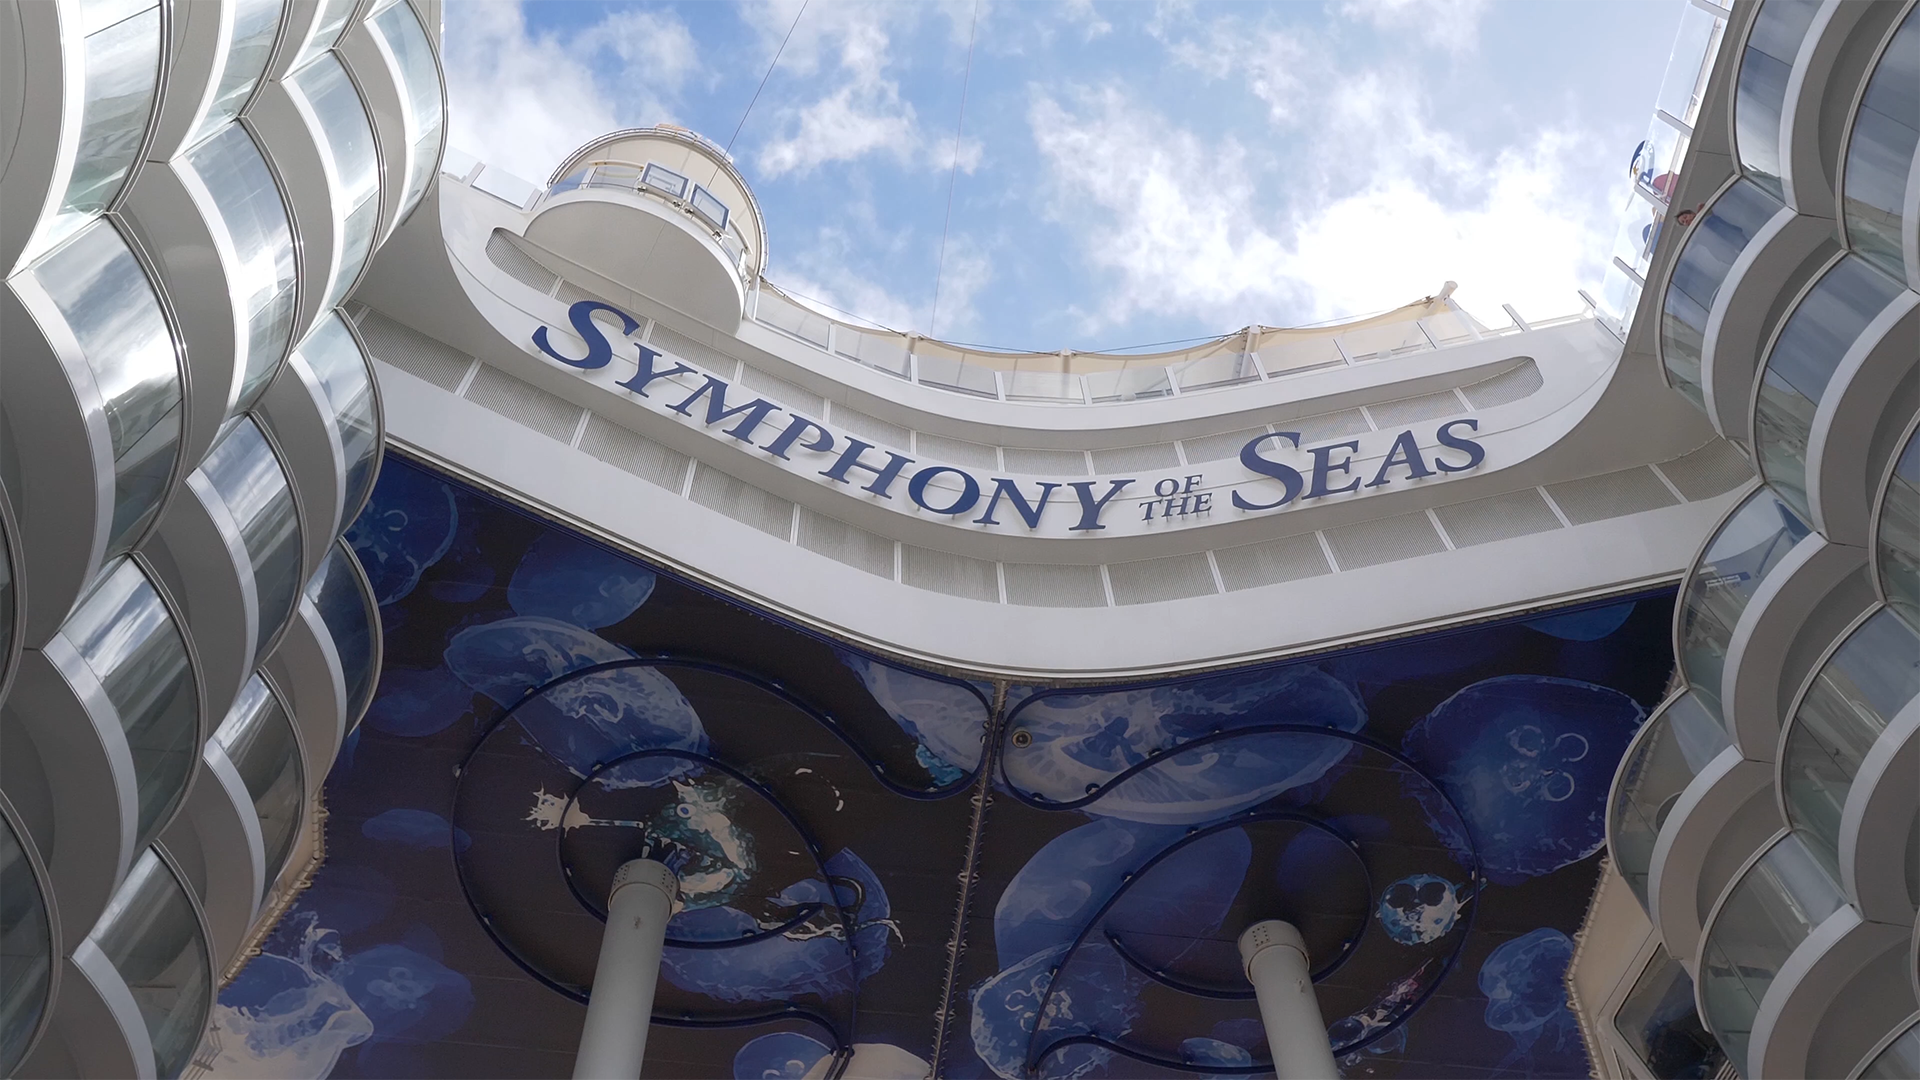 Sean and Stef Symphony of the Seas Live Review